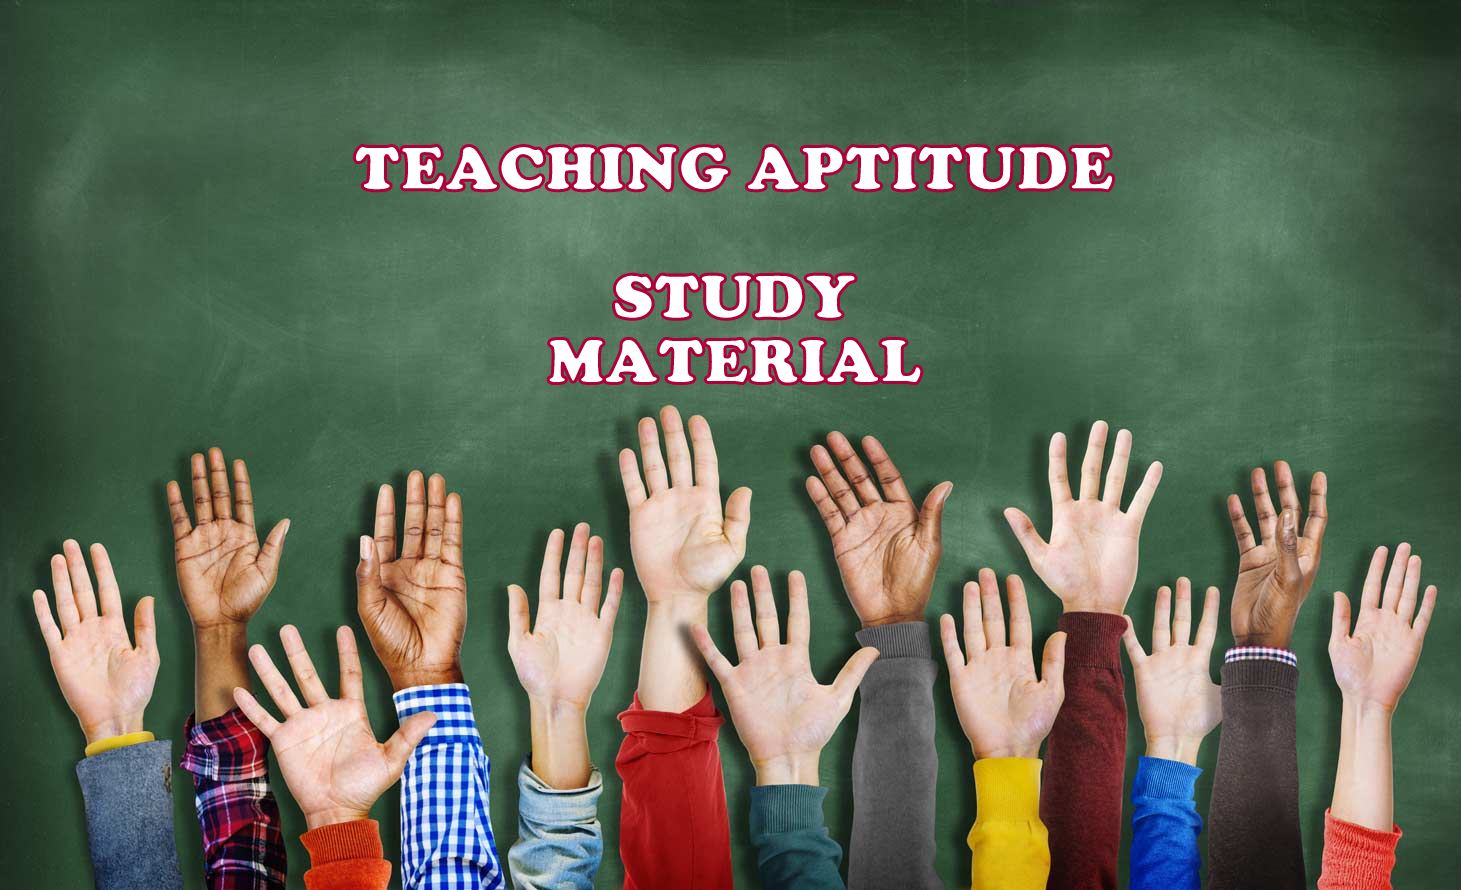 teaching-aptitude-study-material-notes-simplynotes-simplynotes